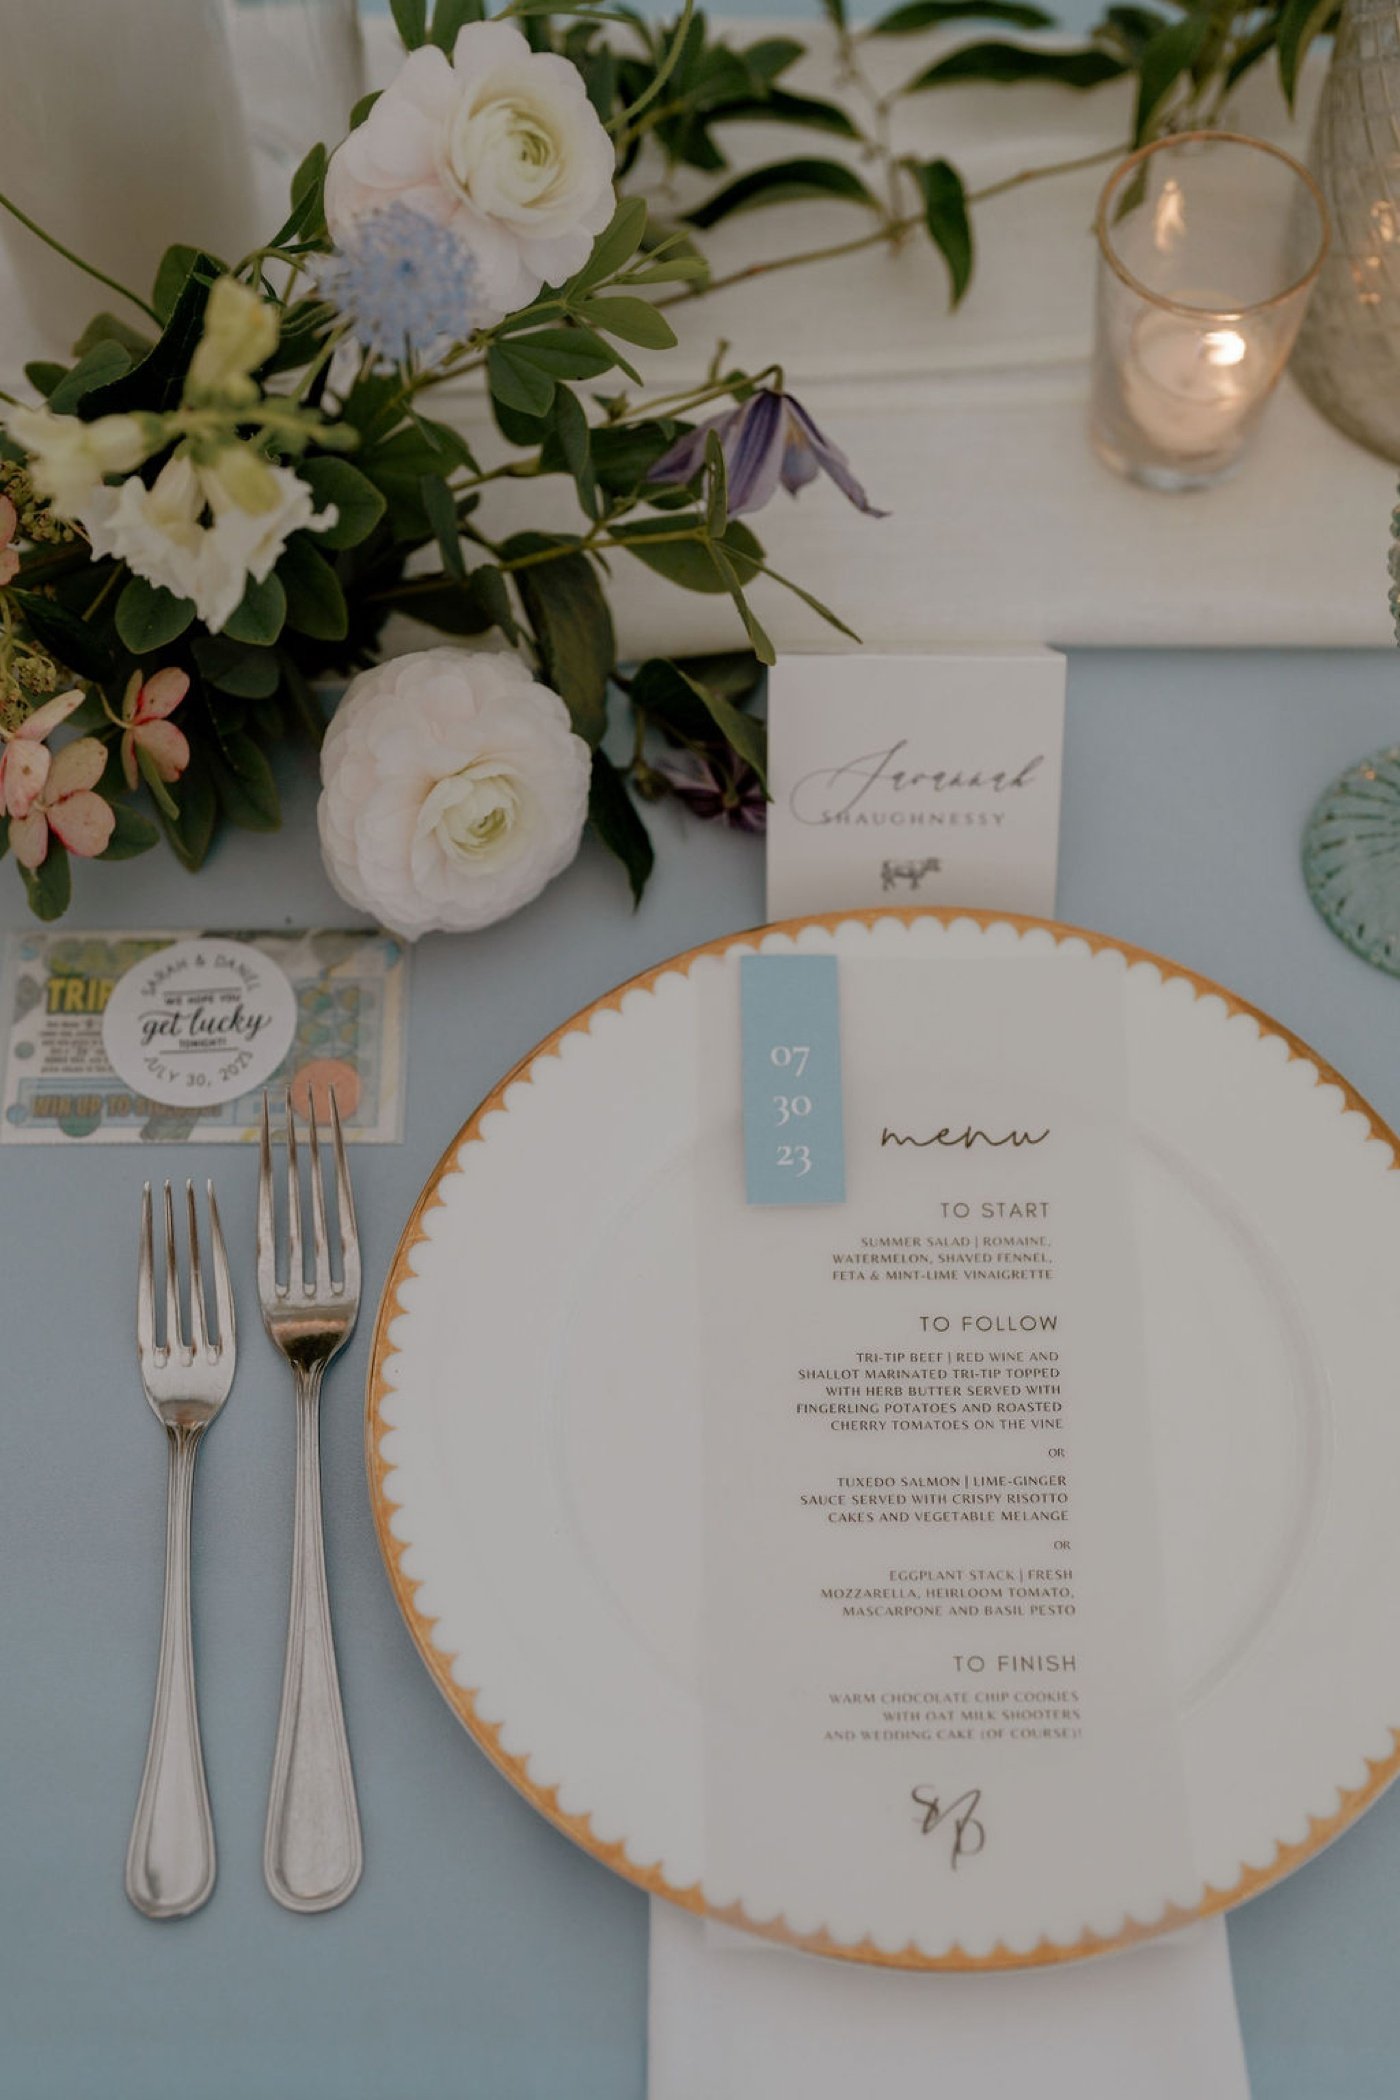 Wedding place setting with a gold rim scalloped charger plate and a vellum menu card